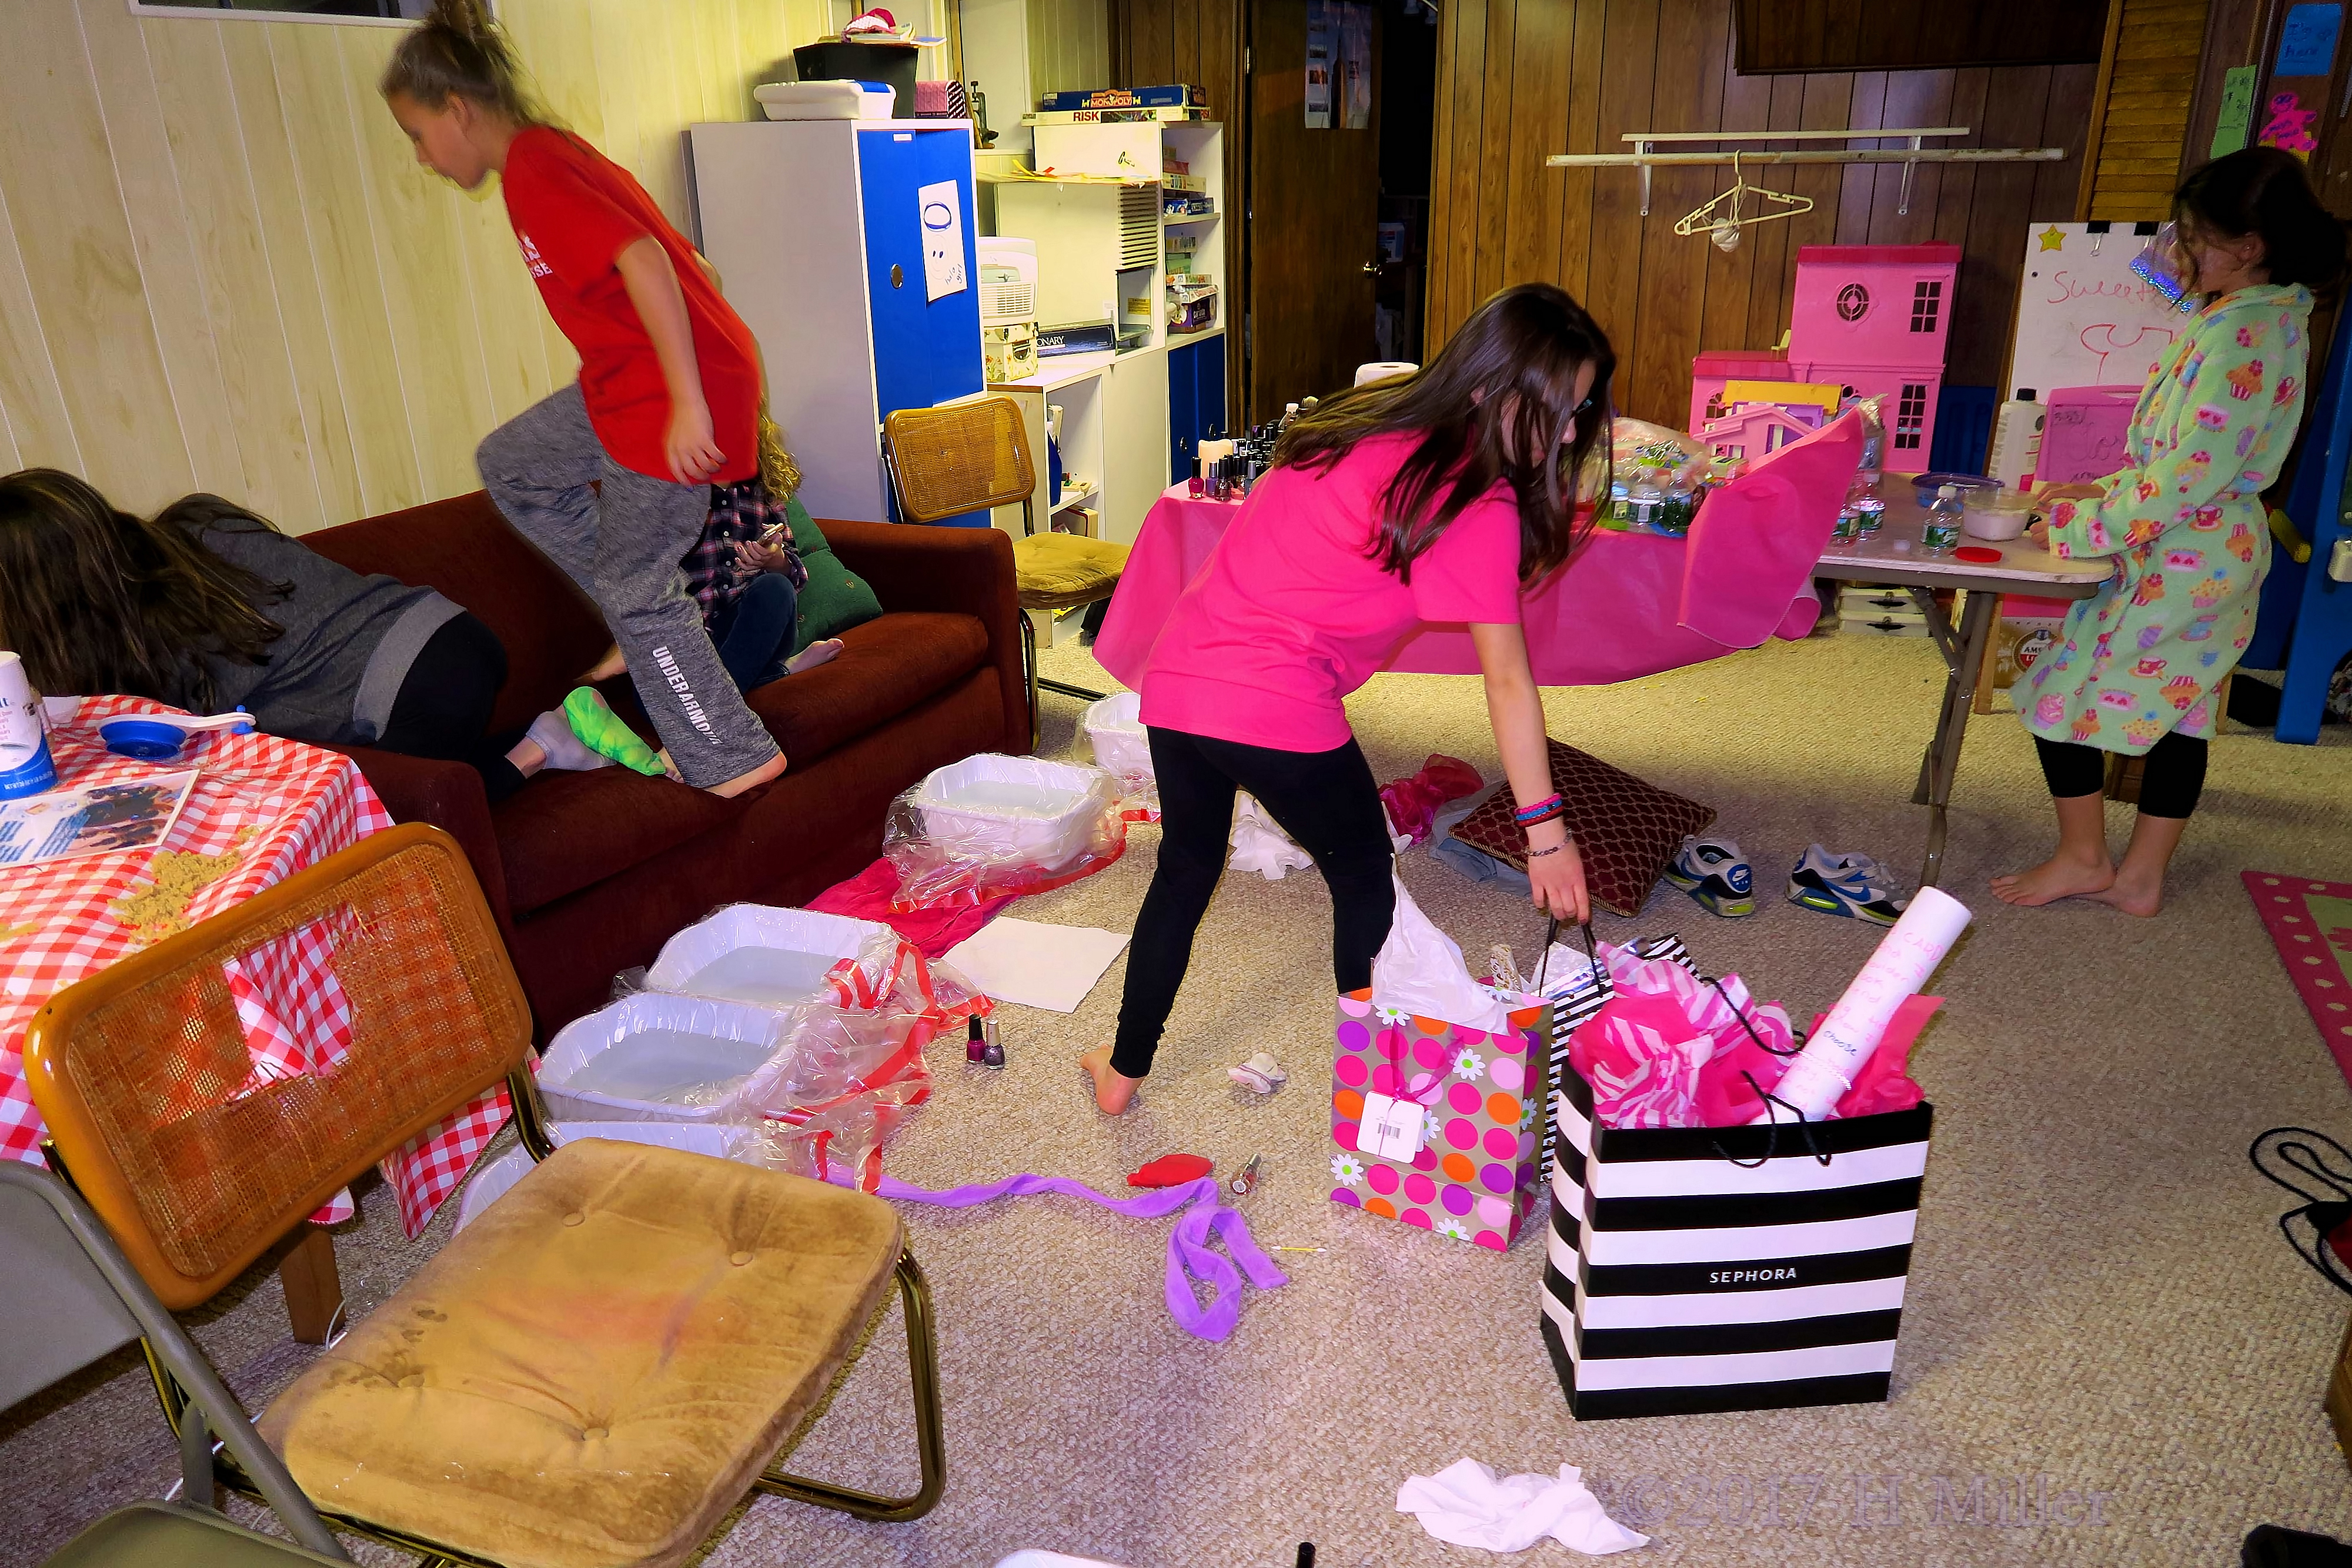 Everyone Gets Ready For The Birthday Girl To Open Her Presents! 4